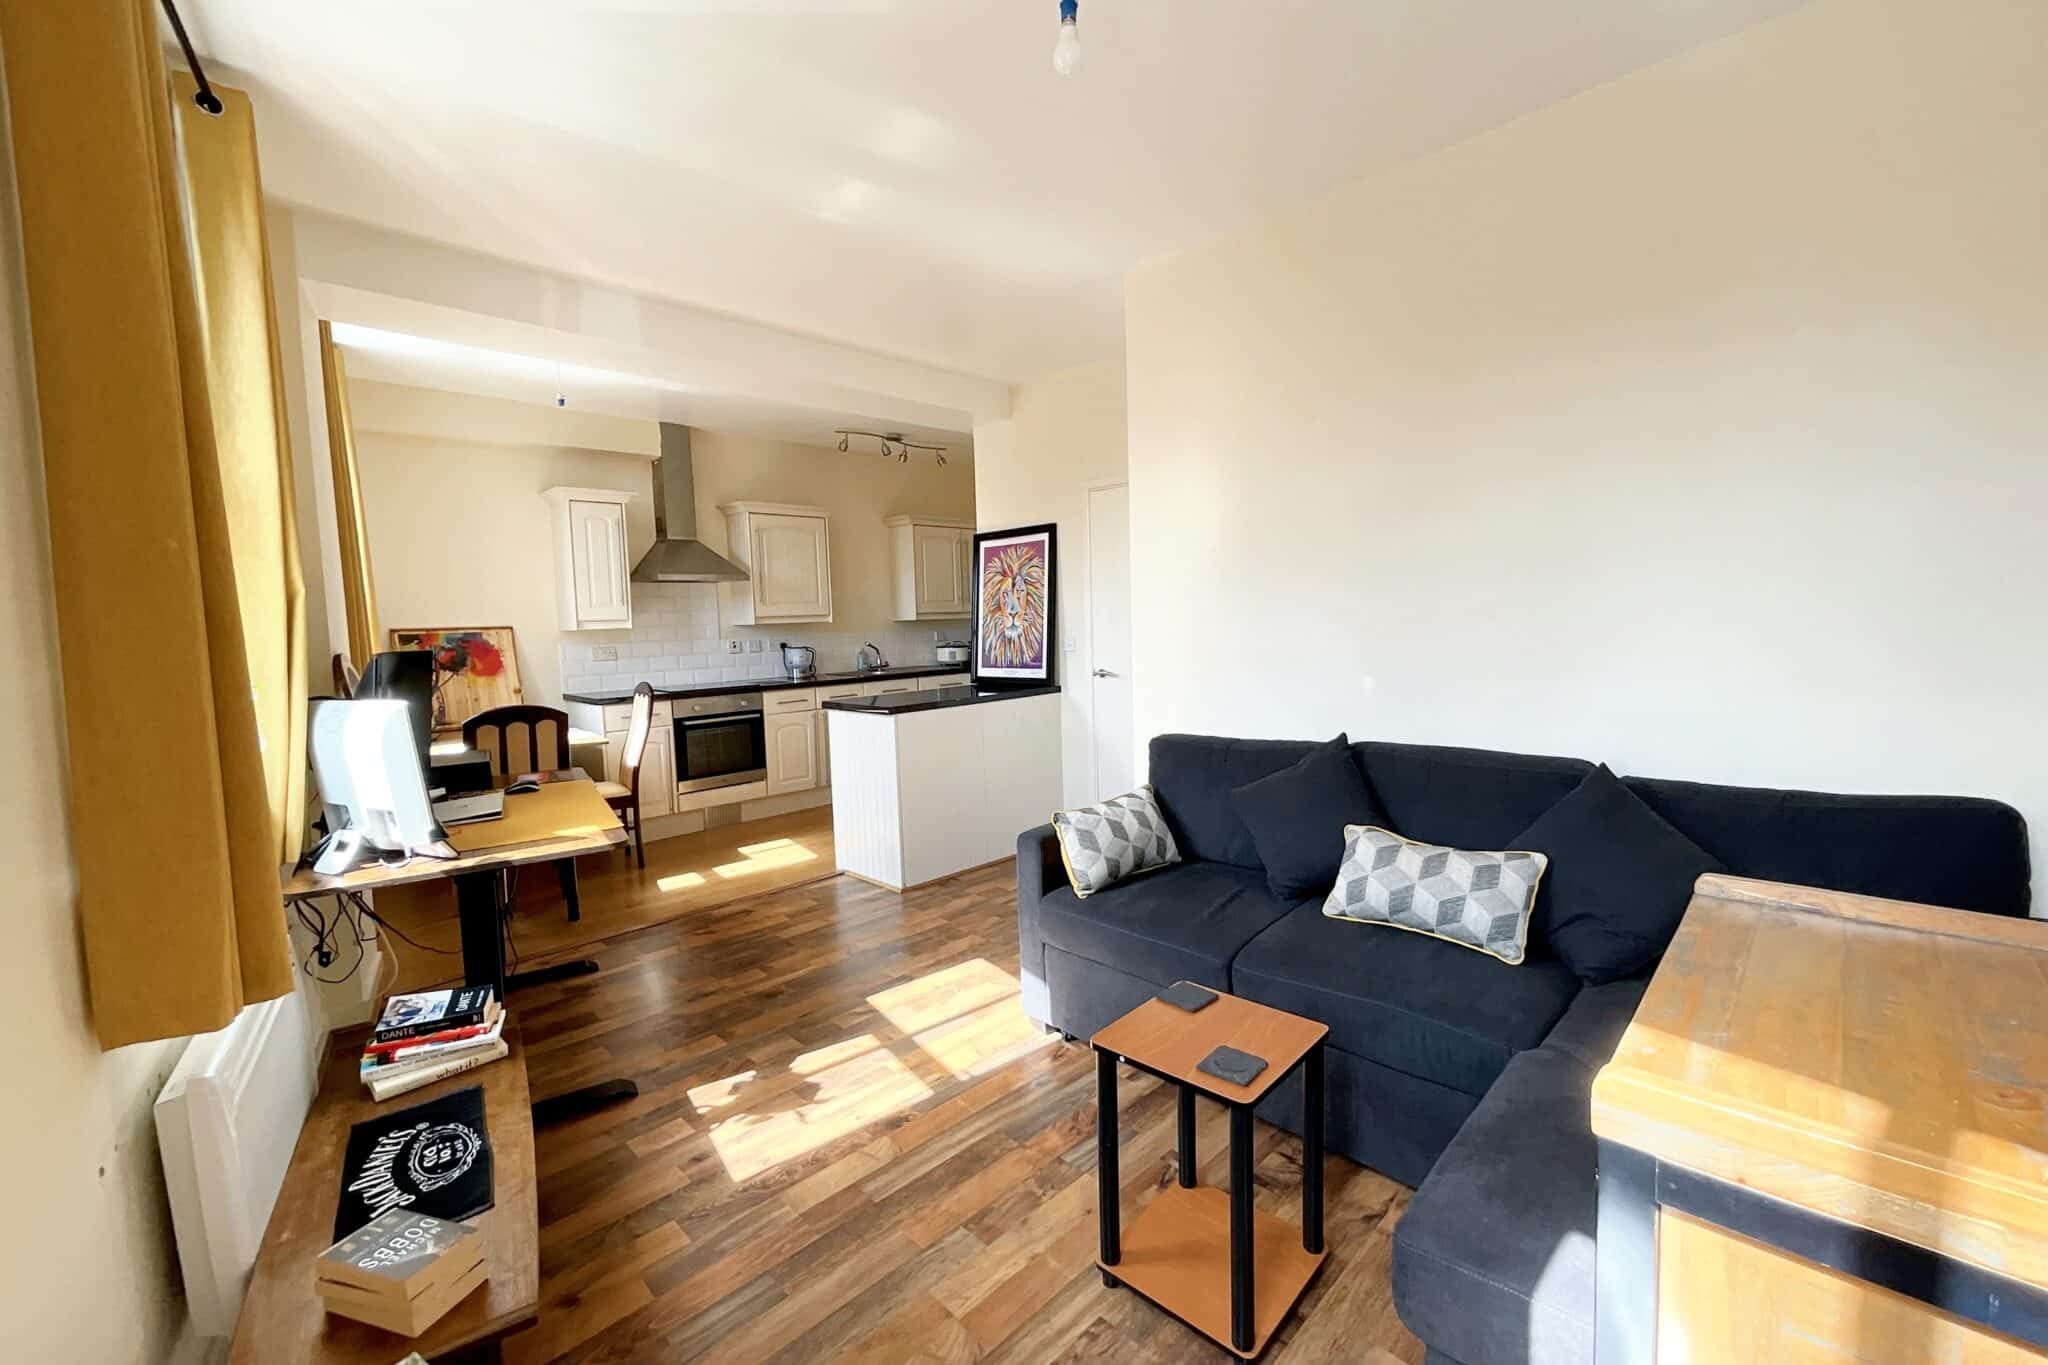 Flat 11, Hadden-Costello House, Leicester, 122 Lansdowne Road, LE2 8AR